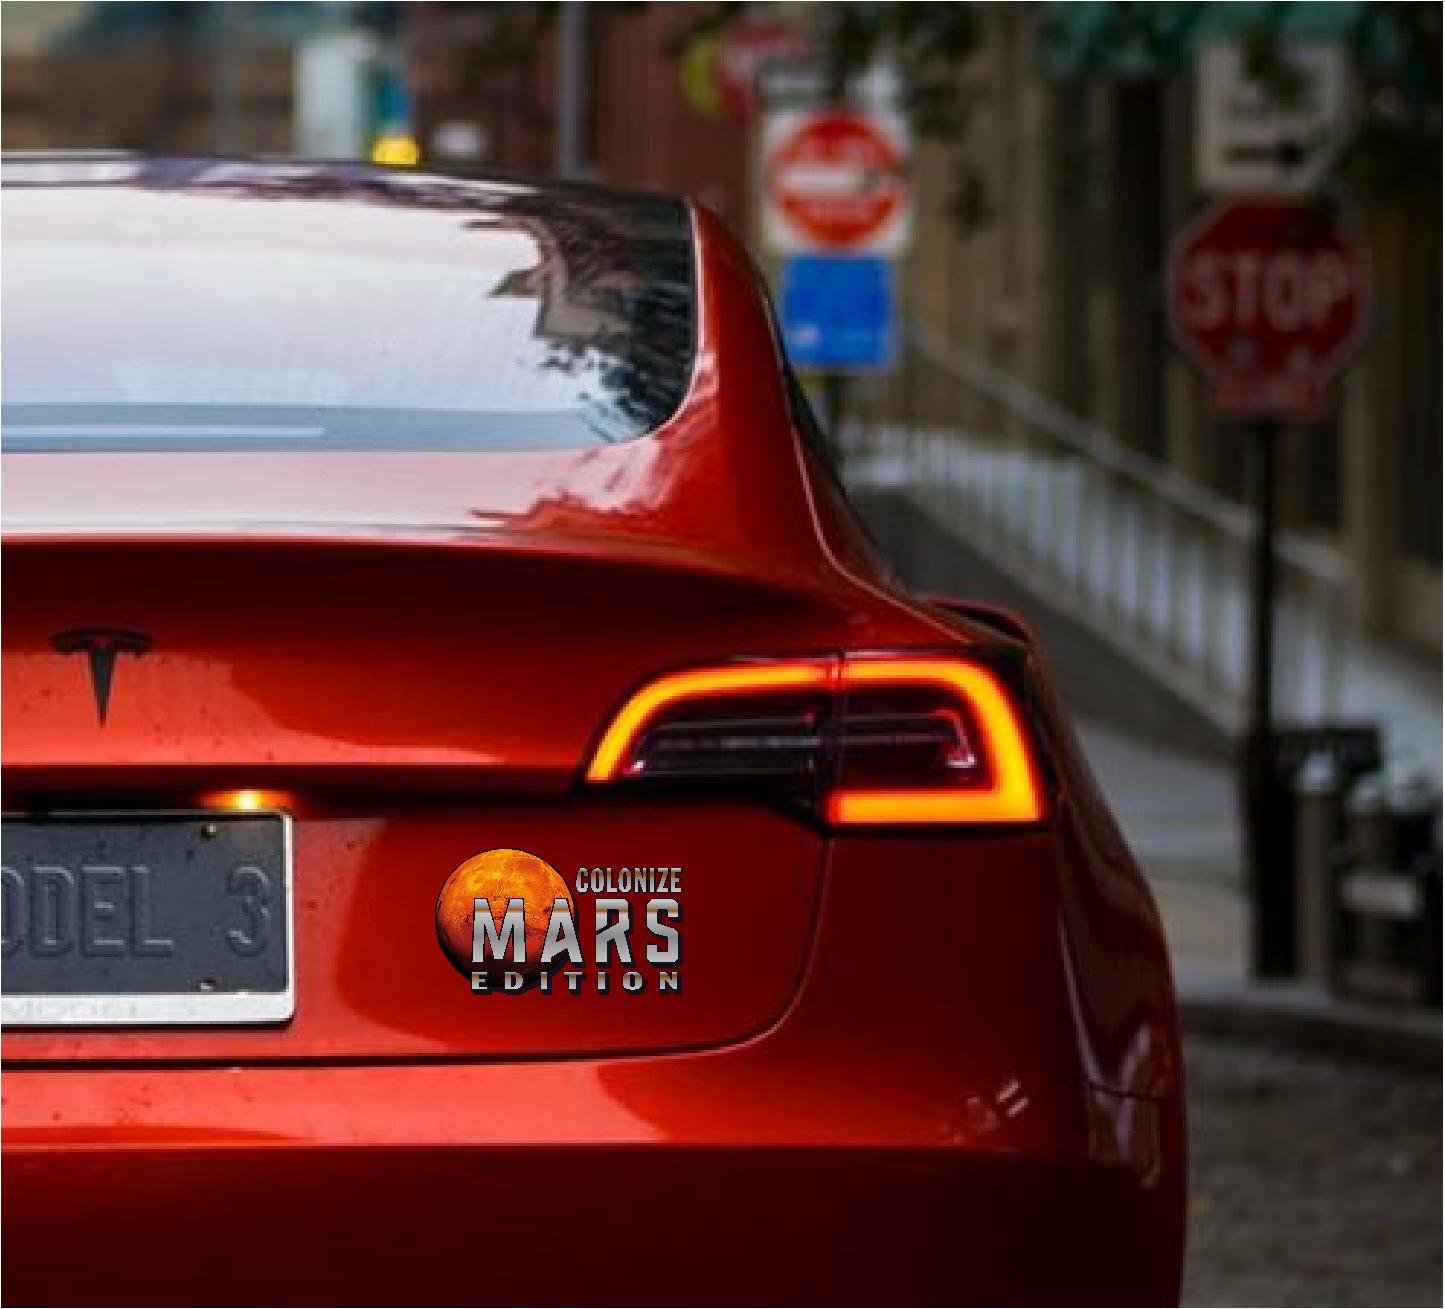 Elon Musk Edition decal & sticker for your Tesla